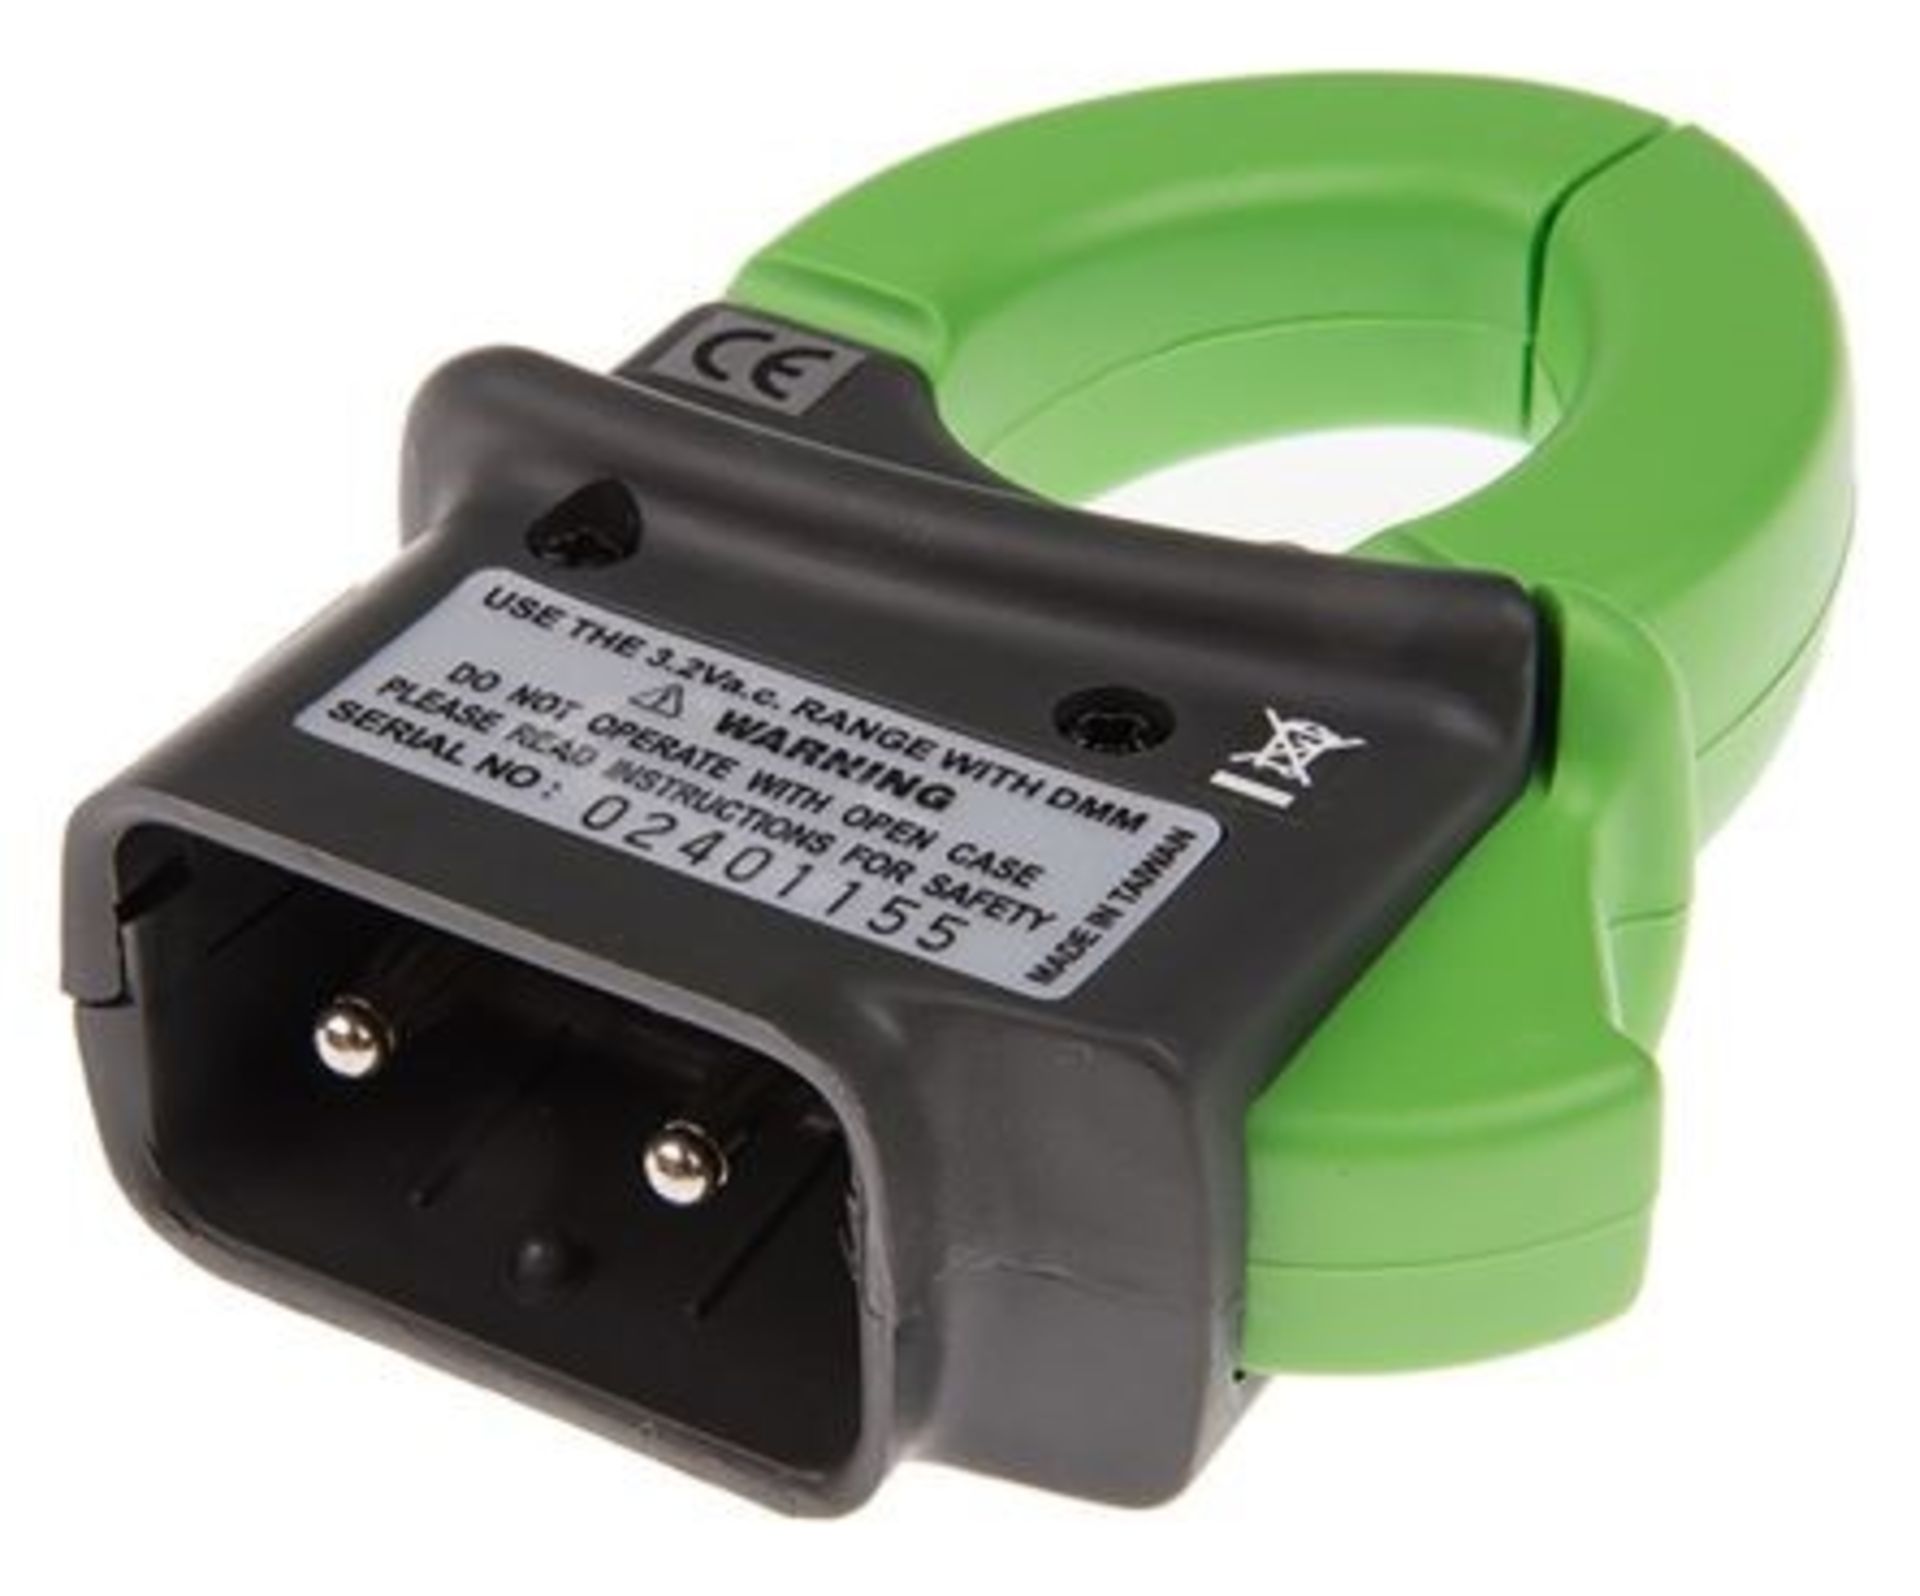 ISO-TECH ICA15 Multimeter Current Clamp Adapter, 300A ac, 29mm - Image 2 of 2